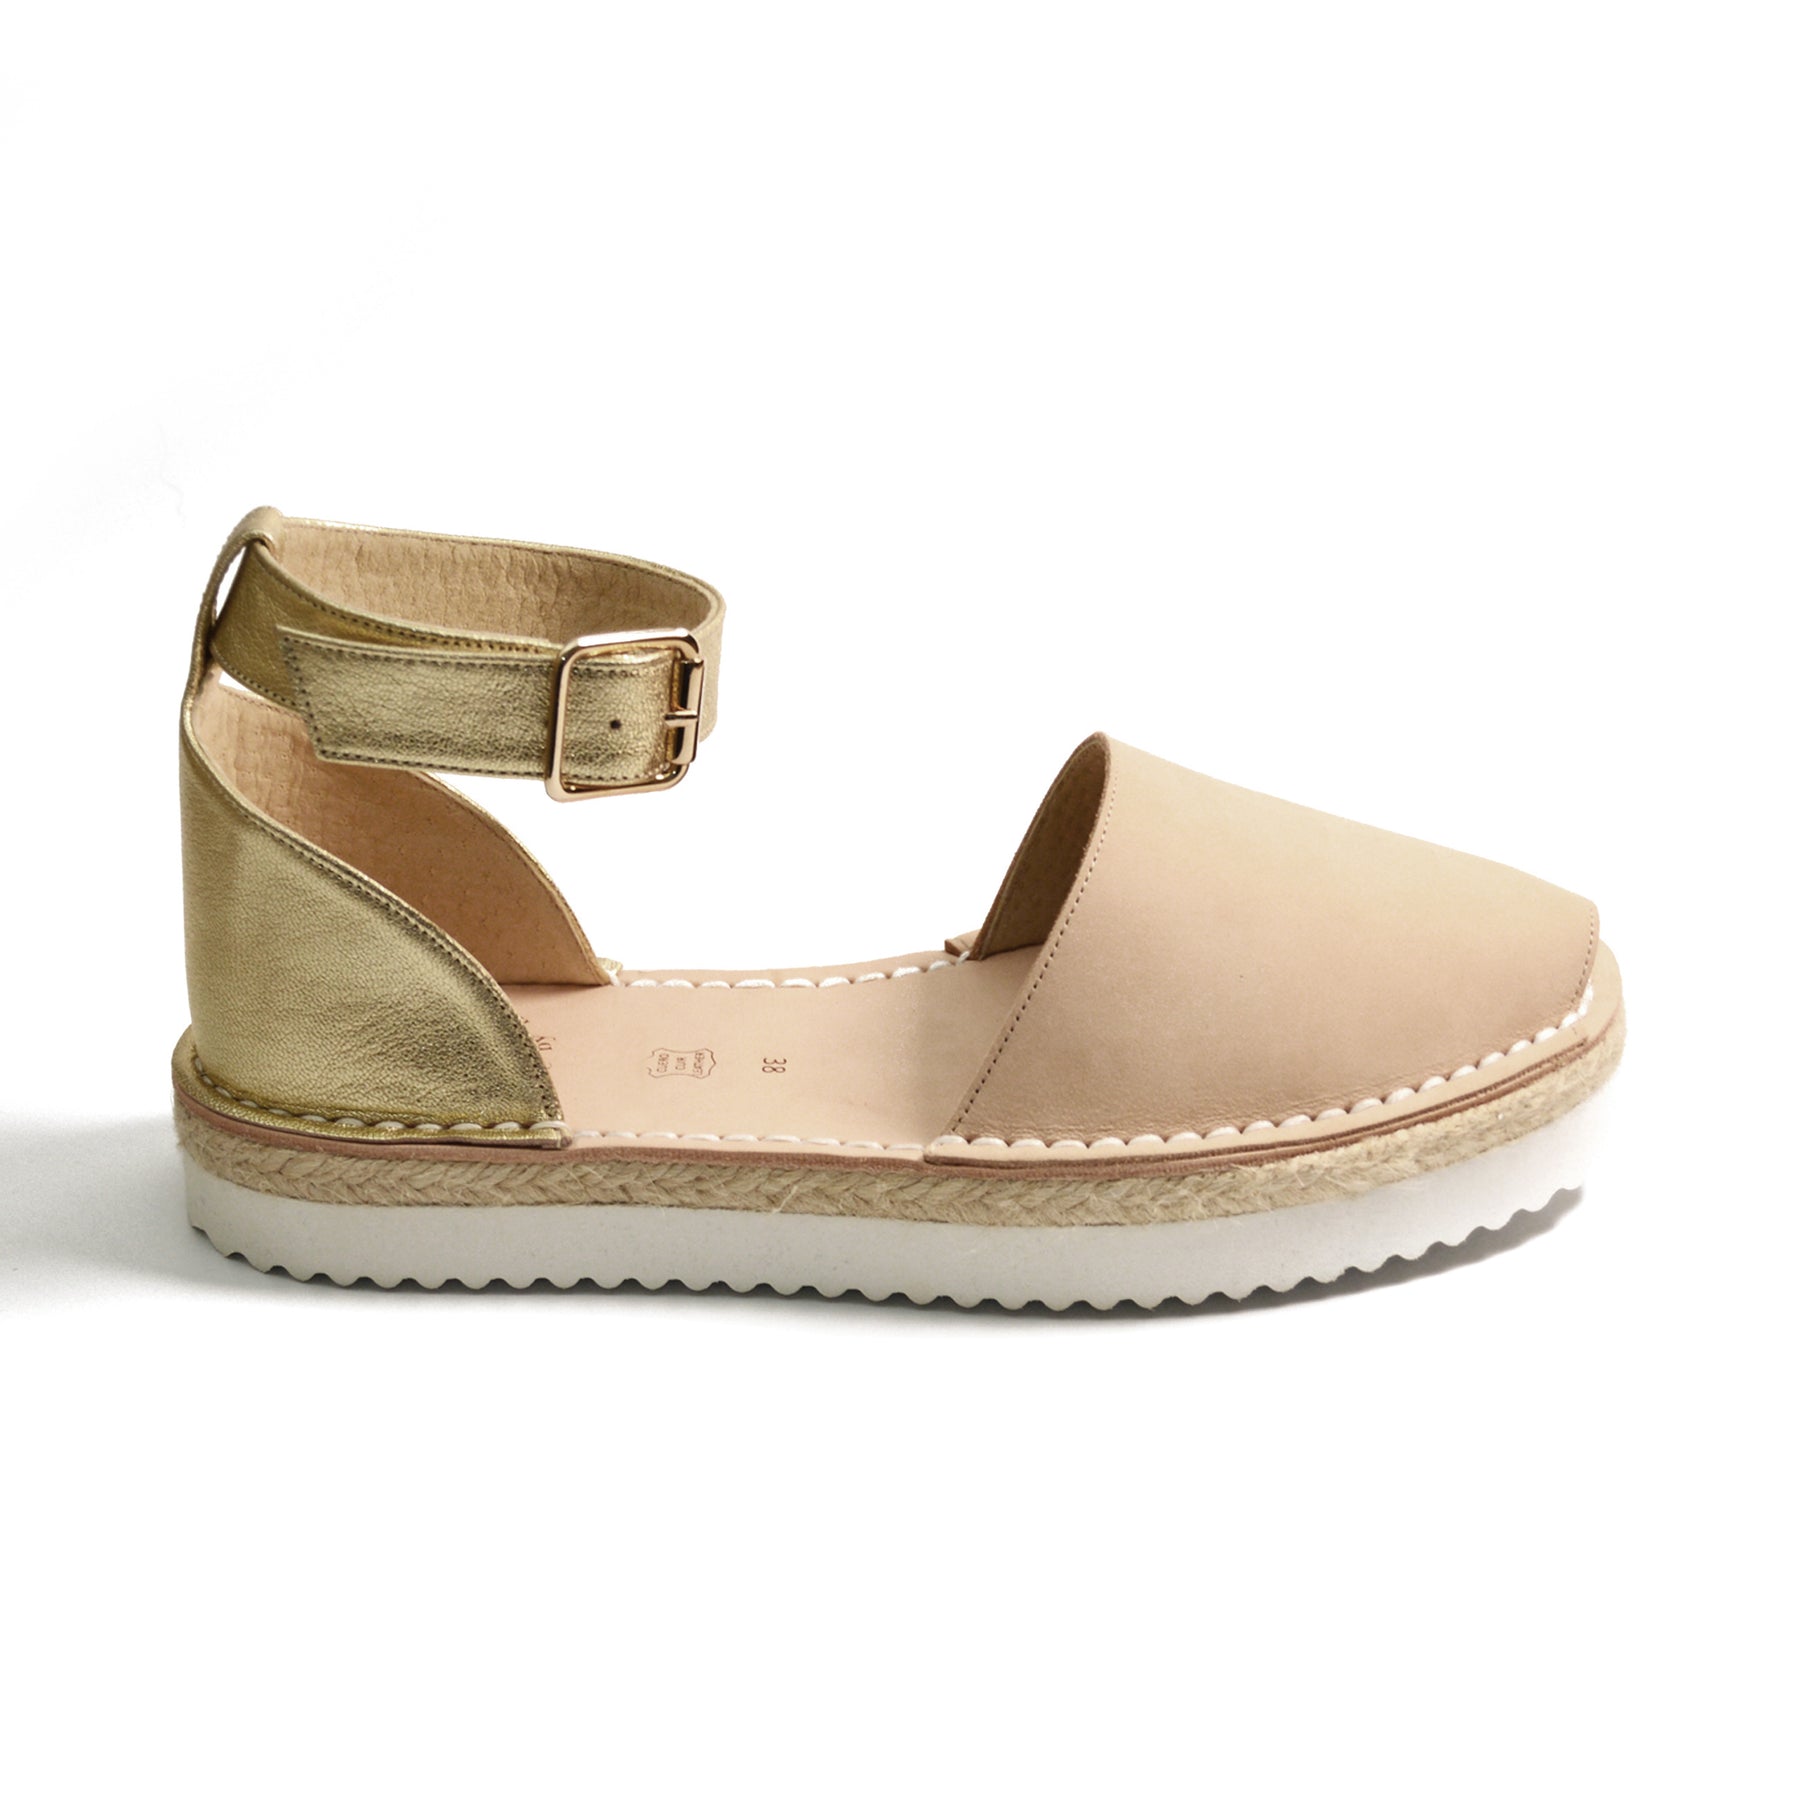 neutral suede with anklestrap flatform menorcan spanish avarcas sandals